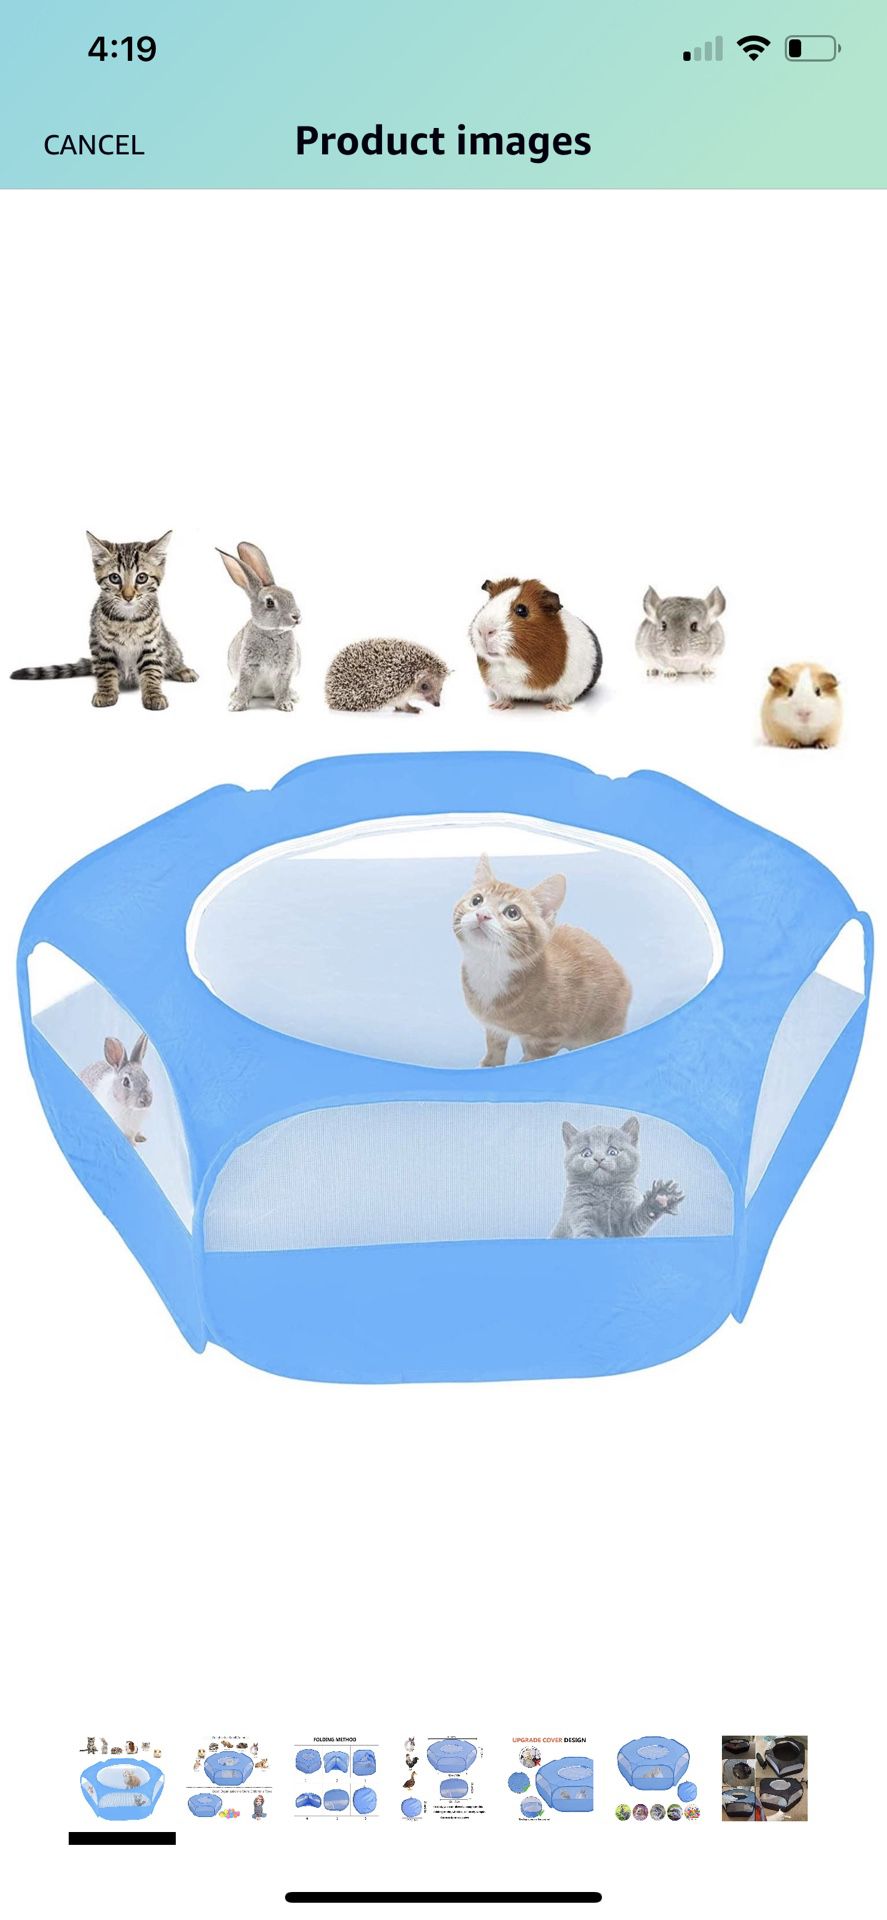 Small Animals Playpen Foldable Pet Cage with Zippered Cover,Lightweight Portable Outdoor Yard Fence for Kitten,Puppy,Guinea Pig,Rabbits,Hamster